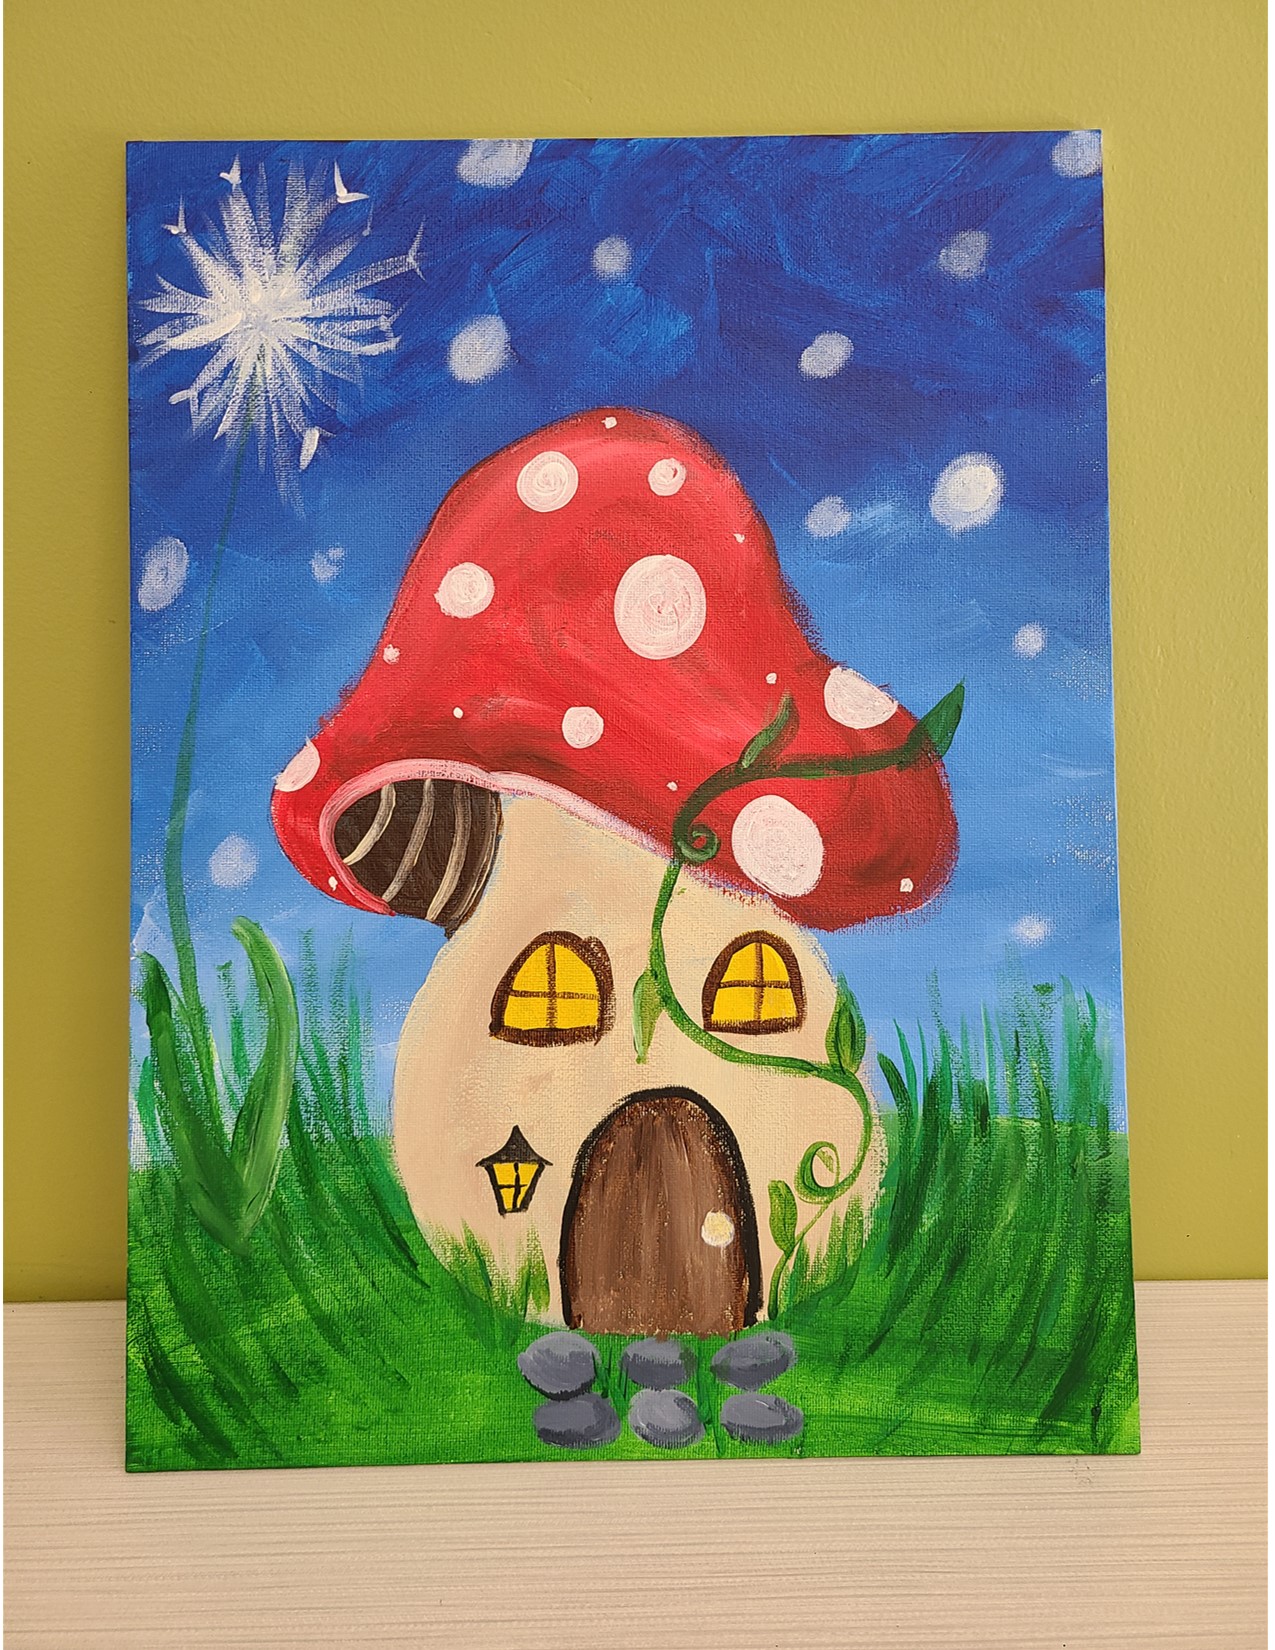 Painting of a mushroom house with a red top against a blue sky and green grass